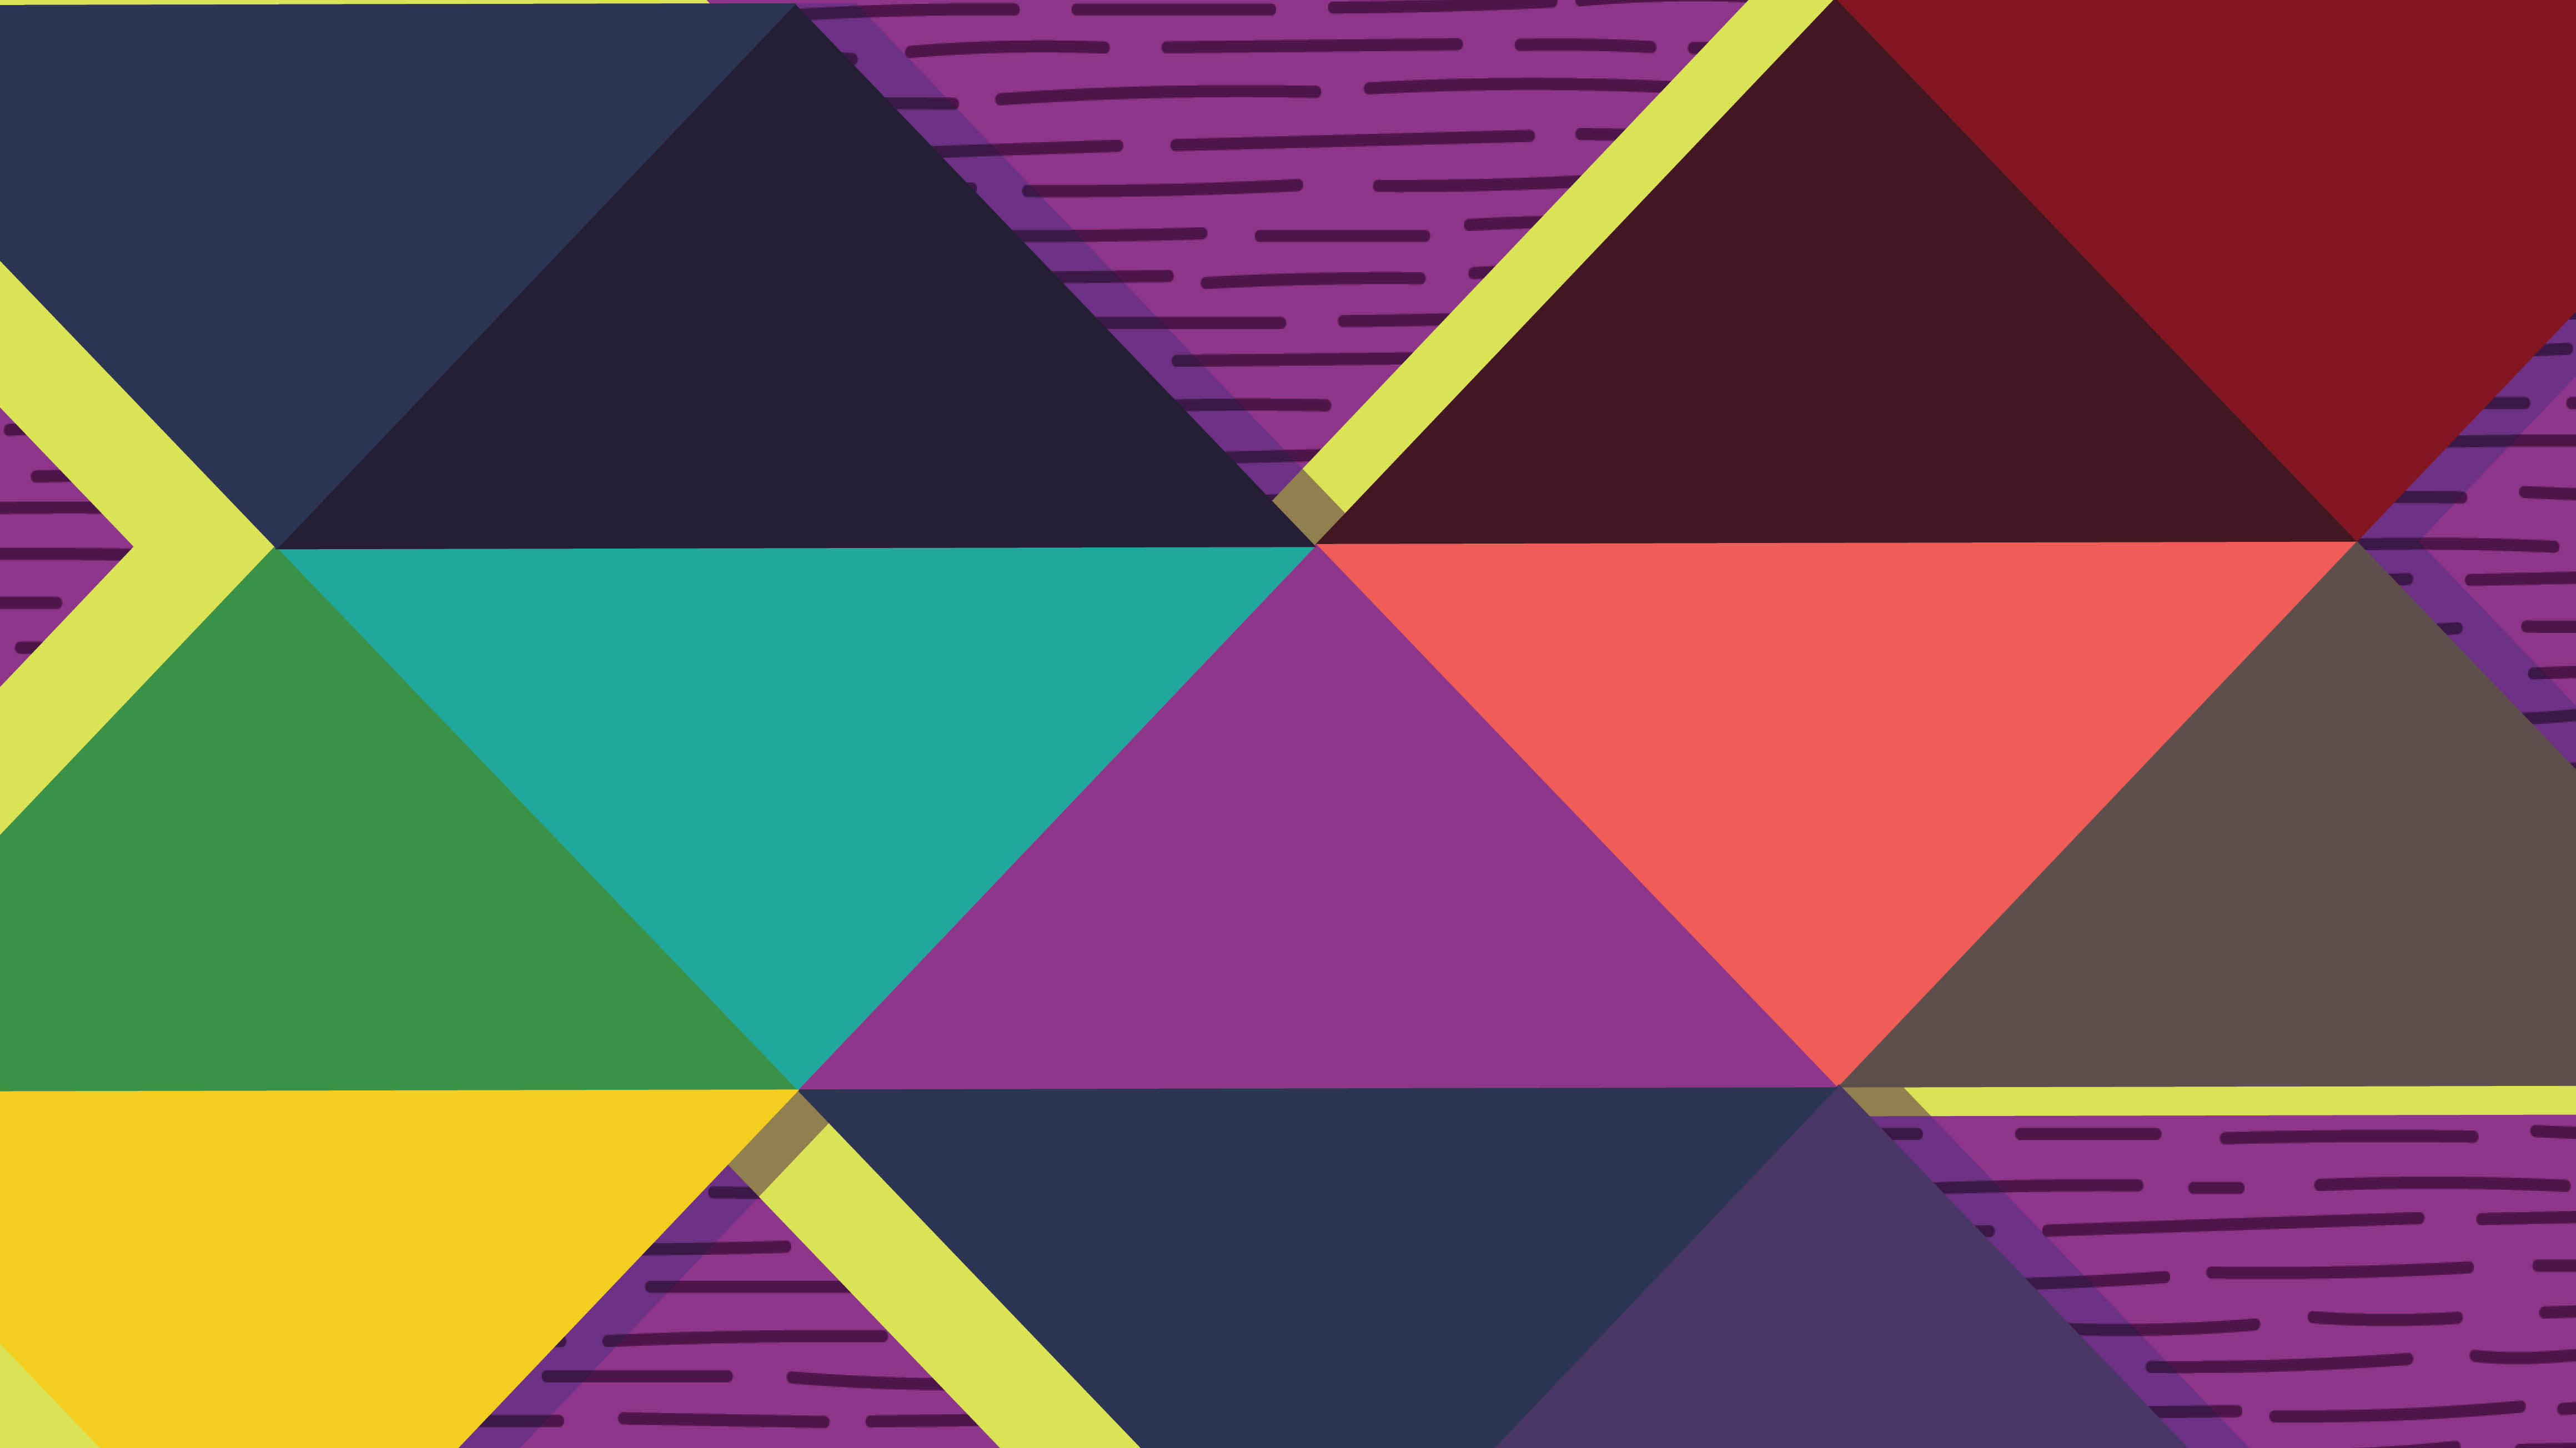 Geometric background pattern featuring stacked triangles in shades of purple, red, navy blue, and turquoise